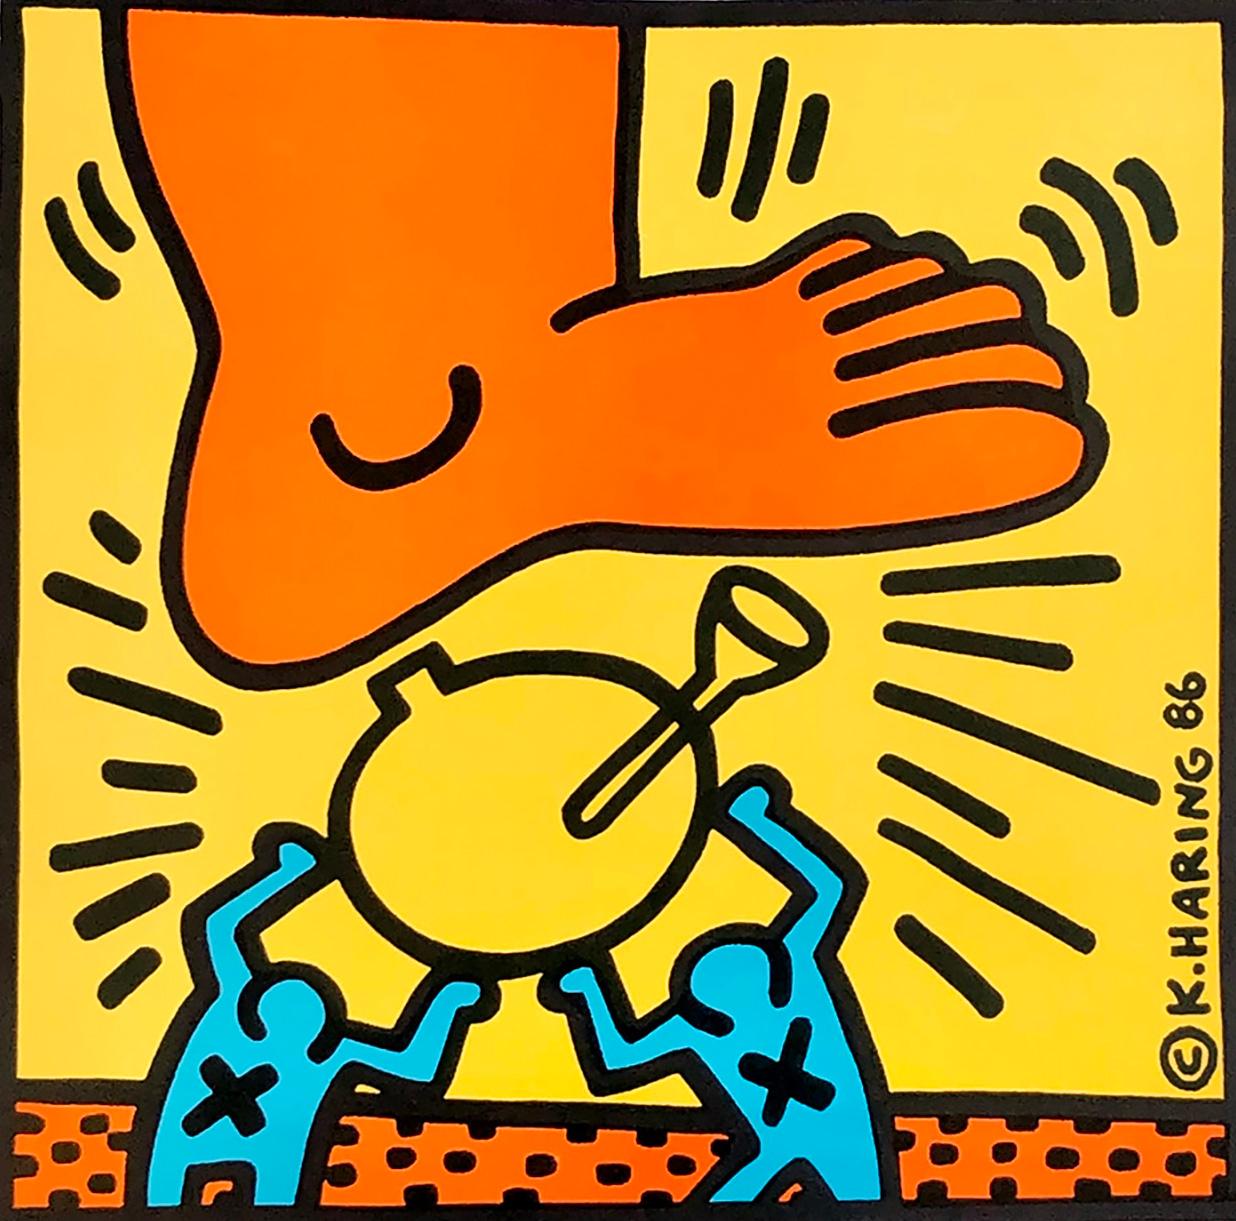 Keith Haring Crack Down! 1986:
Vintage original Keith Haring anti-drug poster, 1986

Medium: Off-set lithograph on heavy weight paper. 

Dimensions: 17 x 22 inches.
Minor signs of handling; otherwise excellent condition; well-preserved, crisp